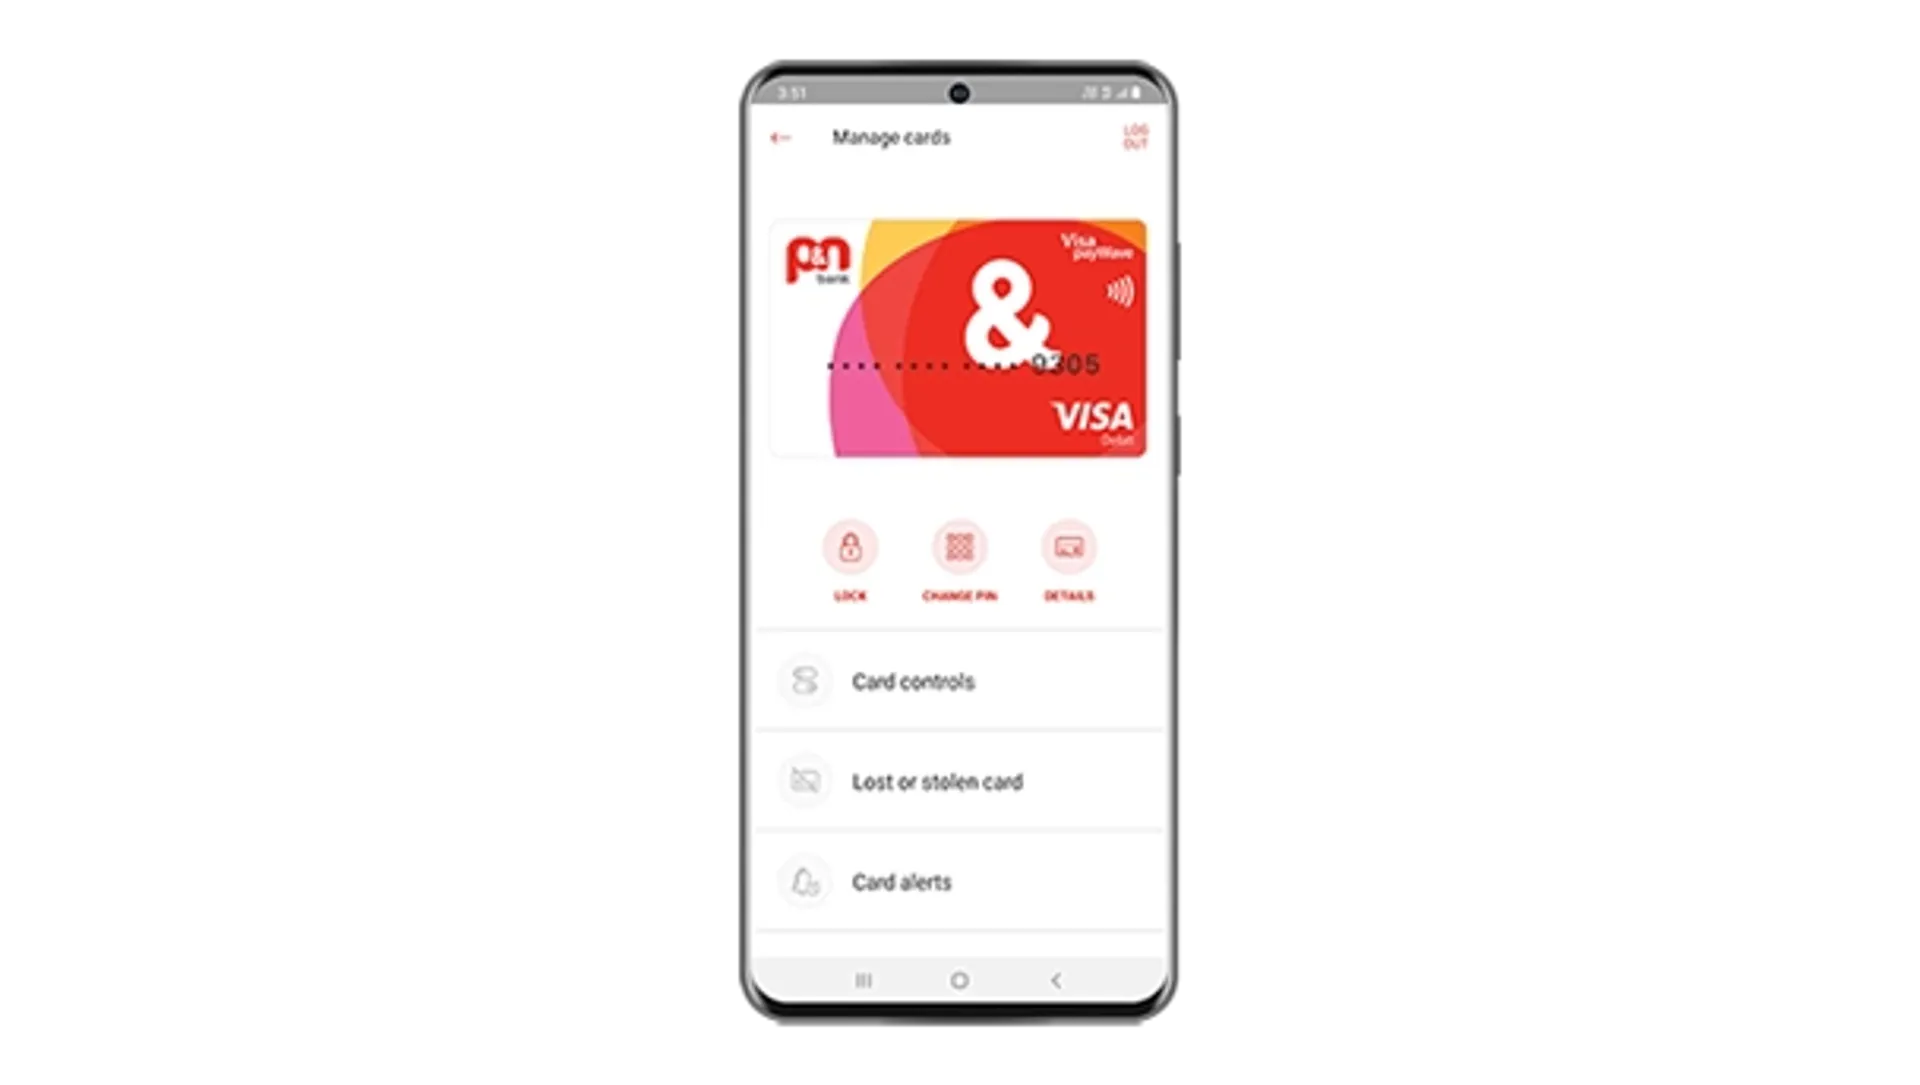 The P&N Bank mobile app card controls screen